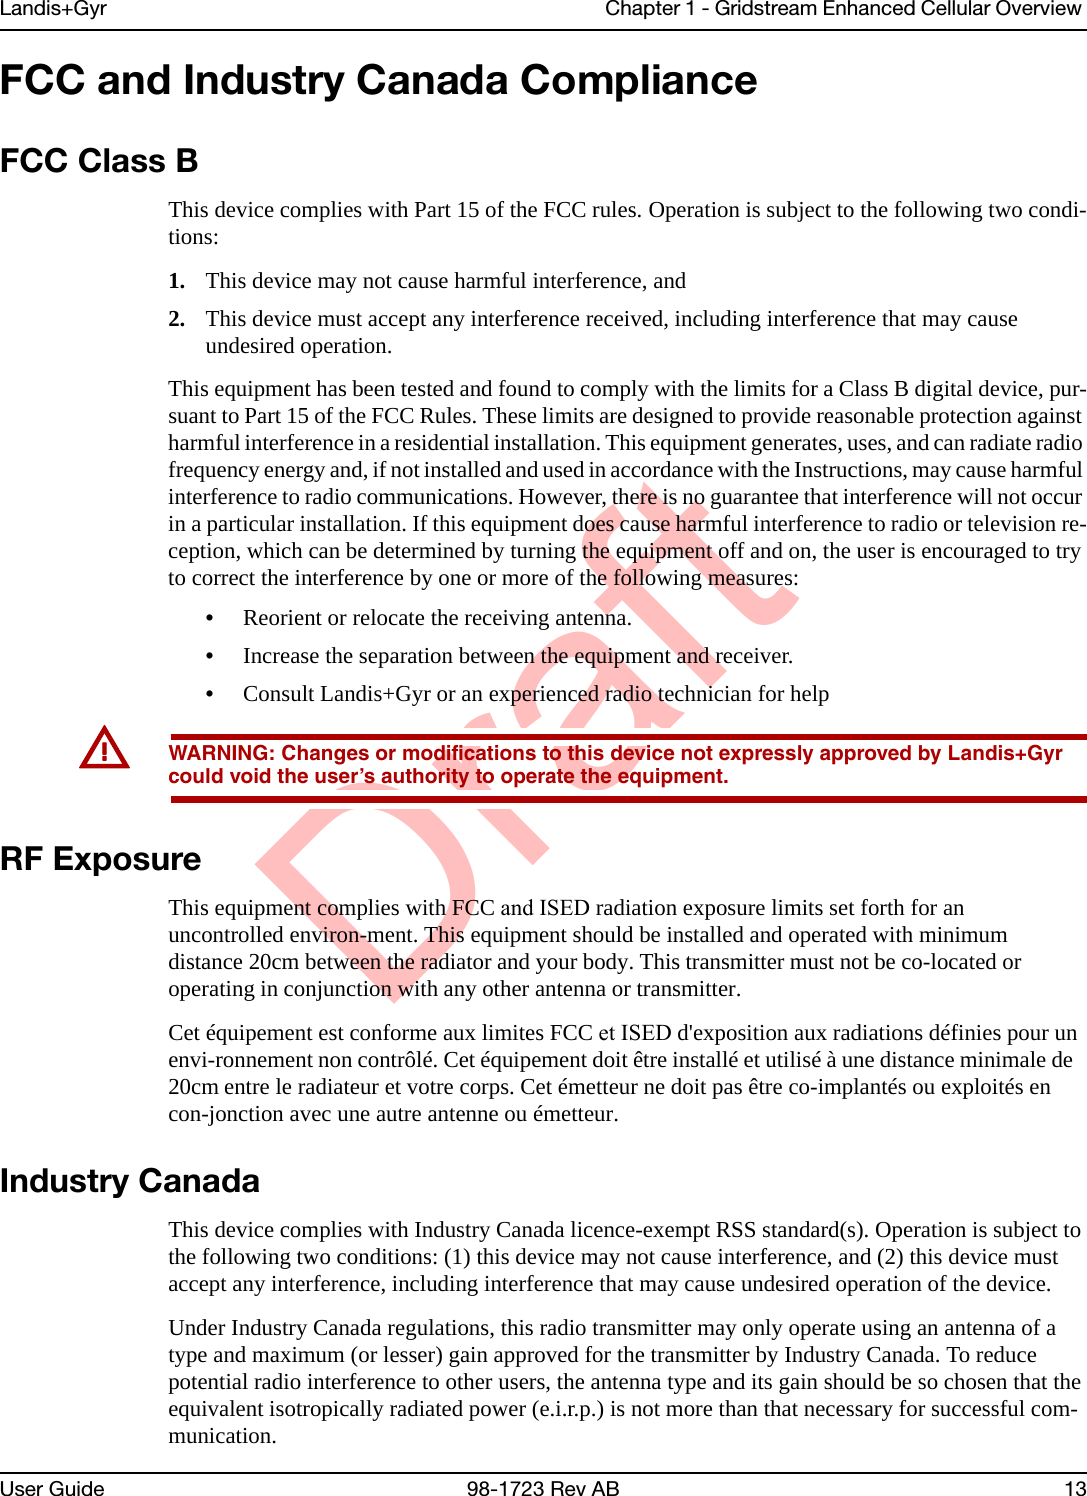 DraftLandis+Gyr Chapter 1 - Gridstream Enhanced Cellular Overview User Guide 98-1723 Rev AB 13FCC and Industry Canada ComplianceFCC Class BThis device complies with Part 15 of the FCC rules. Operation is subject to the following two condi-tions: 1. This device may not cause harmful interference, and2. This device must accept any interference received, including interference that may causeundesired operation.This equipment has been tested and found to comply with the limits for a Class B digital device, pur-suant to Part 15 of the FCC Rules. These limits are designed to provide reasonable protection against harmful interference in a residential installation. This equipment generates, uses, and can radiate radio frequency energy and, if not installed and used in accordance with the Instructions, may cause harmful interference to radio communications. However, there is no guarantee that interference will not occur in a particular installation. If this equipment does cause harmful interference to radio or television re-ception, which can be determined by turning the equipment off and on, the user is encouraged to try to correct the interference by one or more of the following measures: •Reorient or relocate the receiving antenna.•Increase the separation between the equipment and receiver.•Consult Landis+Gyr or an experienced radio technician for helpUWARNING: Changes or modifications to this device not expressly approved by Landis+Gyr could void the user’s authority to operate the equipment.RF ExposureThis equipment complies with FCC and ISED radiation exposure limits set forth for an uncontrolled environ-ment. This equipment should be installed and operated with minimum distance 20cm between the radiator and your body. This transmitter must not be co-located or operating in conjunction with any other antenna or transmitter.Cet équipement est conforme aux limites FCC et ISED d&apos;exposition aux radiations définies pour un envi-ronnement non contrôlé. Cet équipement doit être installé et utilisé à une distance minimale de 20cm entre le radiateur et votre corps. Cet émetteur ne doit pas être co-implantés ou exploités en con-jonction avec une autre antenne ou émetteur.Industry CanadaThis device complies with Industry Canada licence-exempt RSS standard(s). Operation is subject to the following two conditions: (1) this device may not cause interference, and (2) this device must accept any interference, including interference that may cause undesired operation of the device.Under Industry Canada regulations, this radio transmitter may only operate using an antenna of a type and maximum (or lesser) gain approved for the transmitter by Industry Canada. To reduce potential radio interference to other users, the antenna type and its gain should be so chosen that the equivalent isotropically radiated power (e.i.r.p.) is not more than that necessary for successful com-munication.